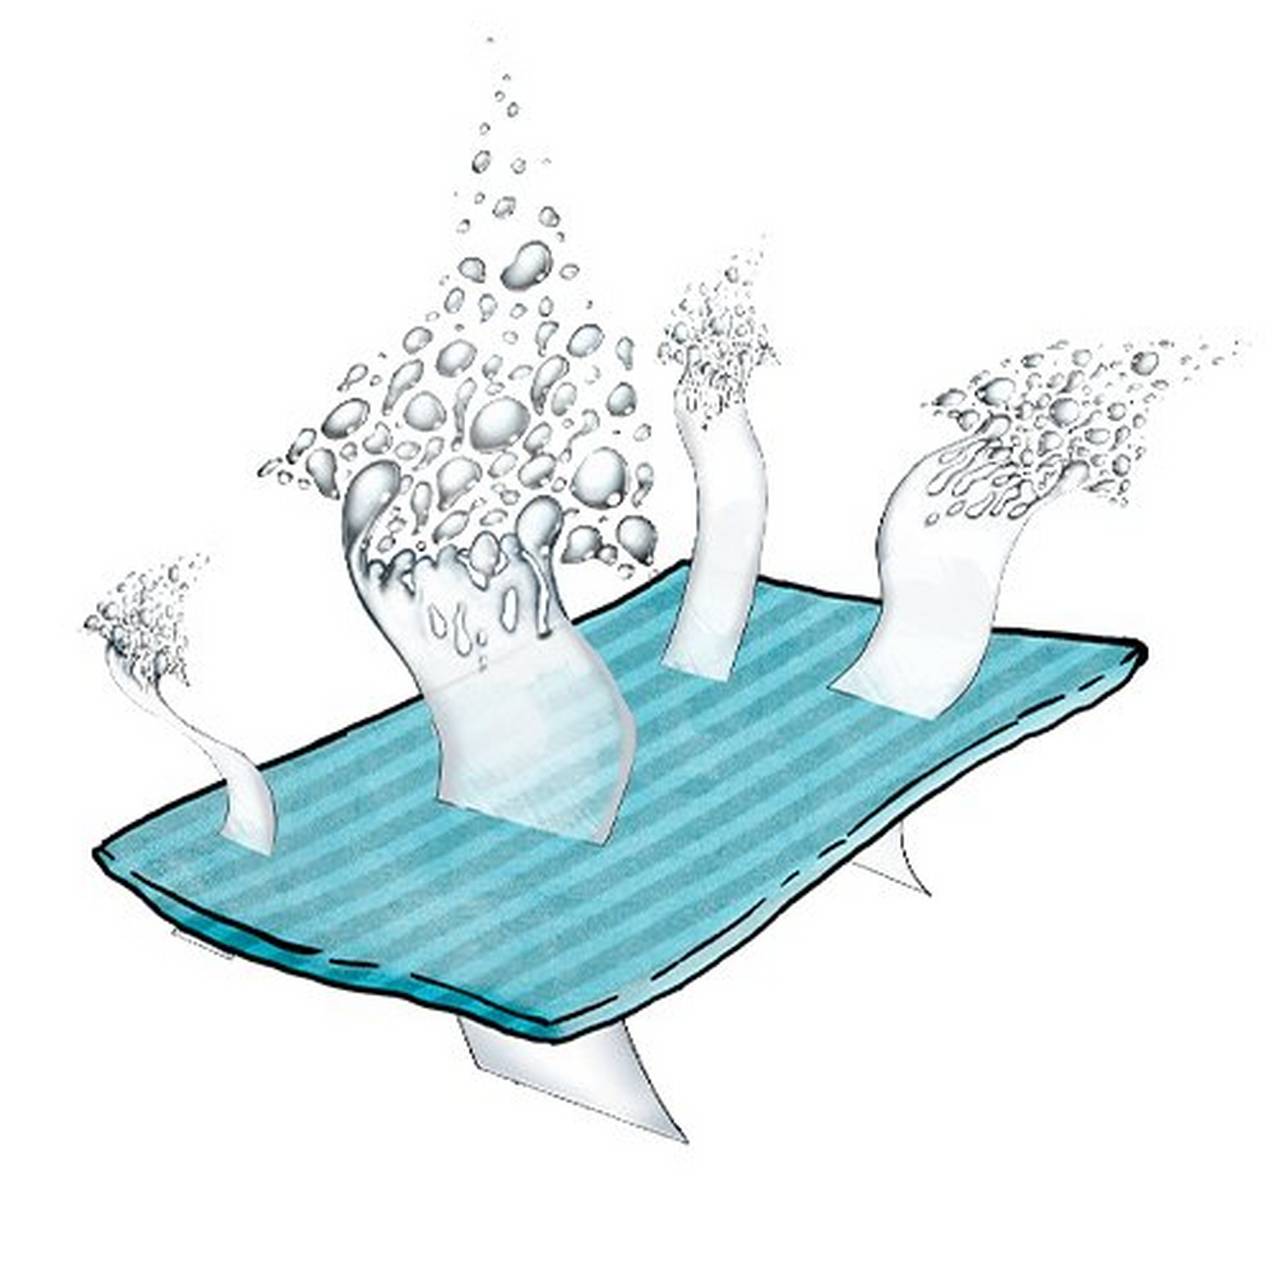 Illustration of moisture droplets formed together to shape arrows moving from one size of fabric to the other